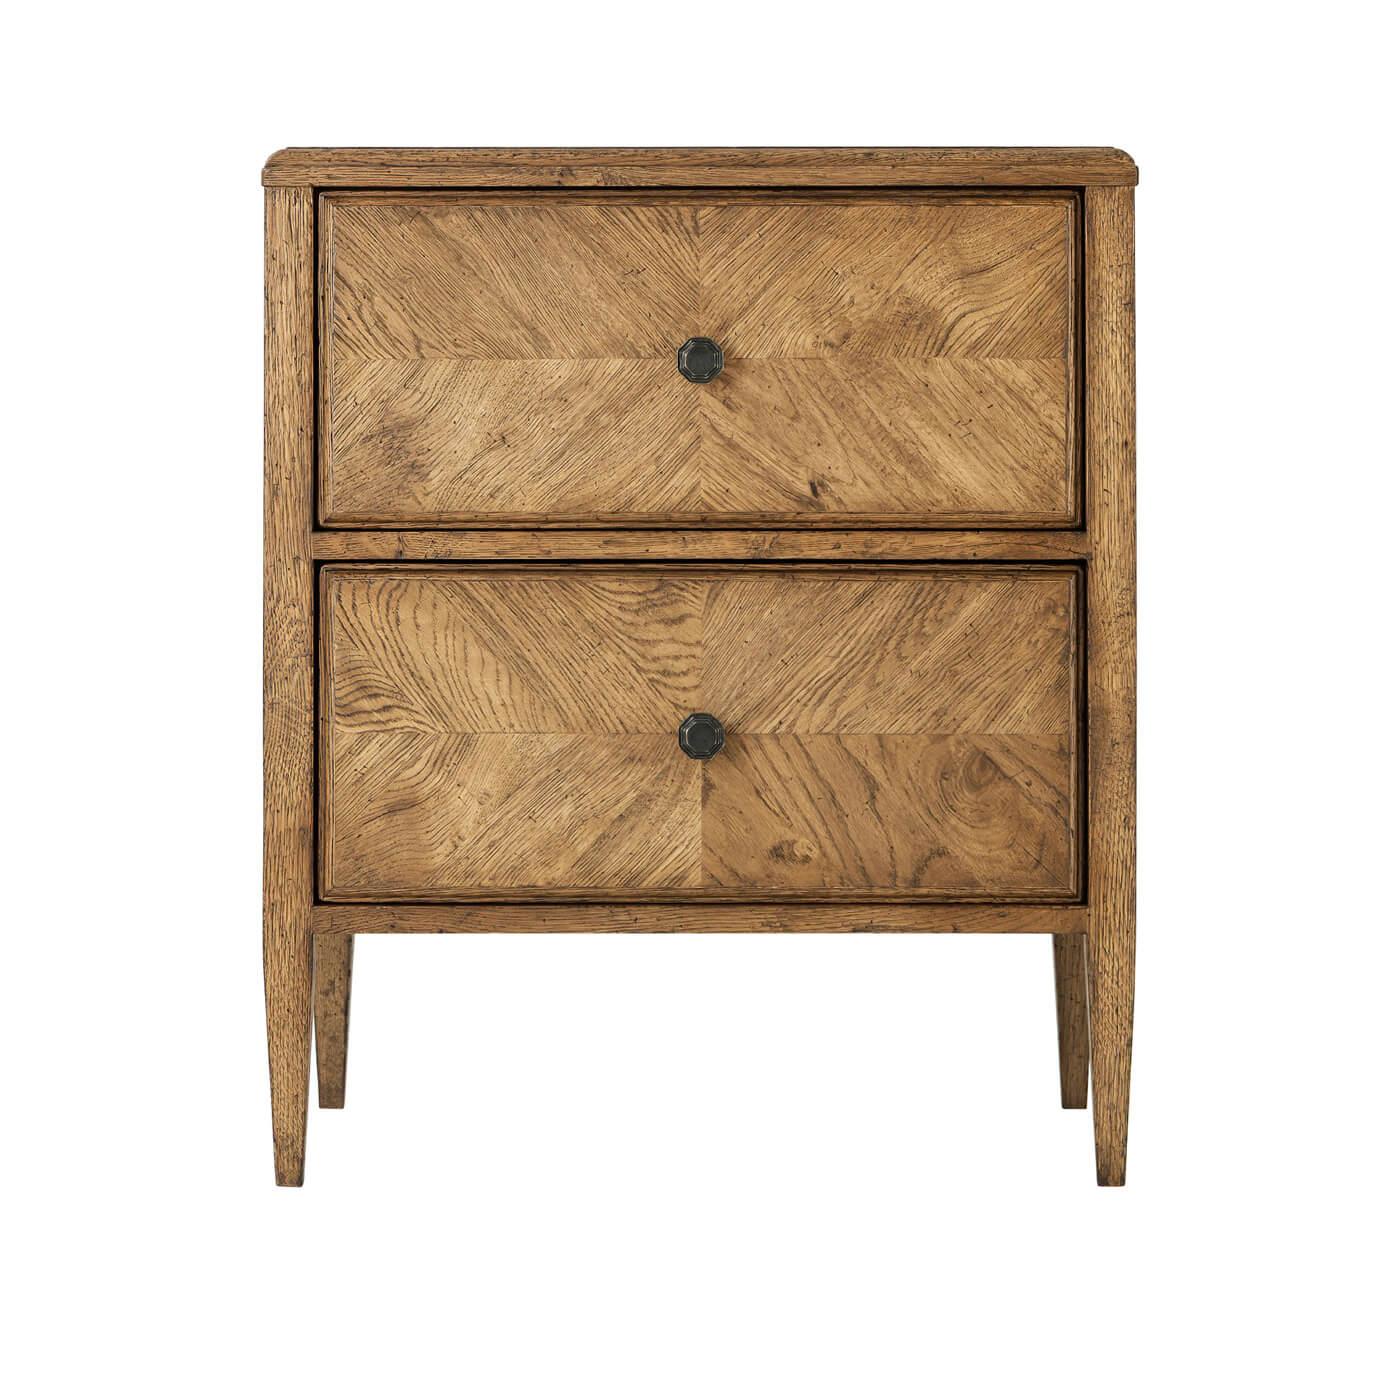 A rustic light oak two-drawer nightstand with a herringbone parquetry design. This beautiful nightstand has two frieze-inspired drawers with Verde Bronze handles. It is supported by two-tier stretcher shelves. 

Shown in Dawn Finish
Dimensions: